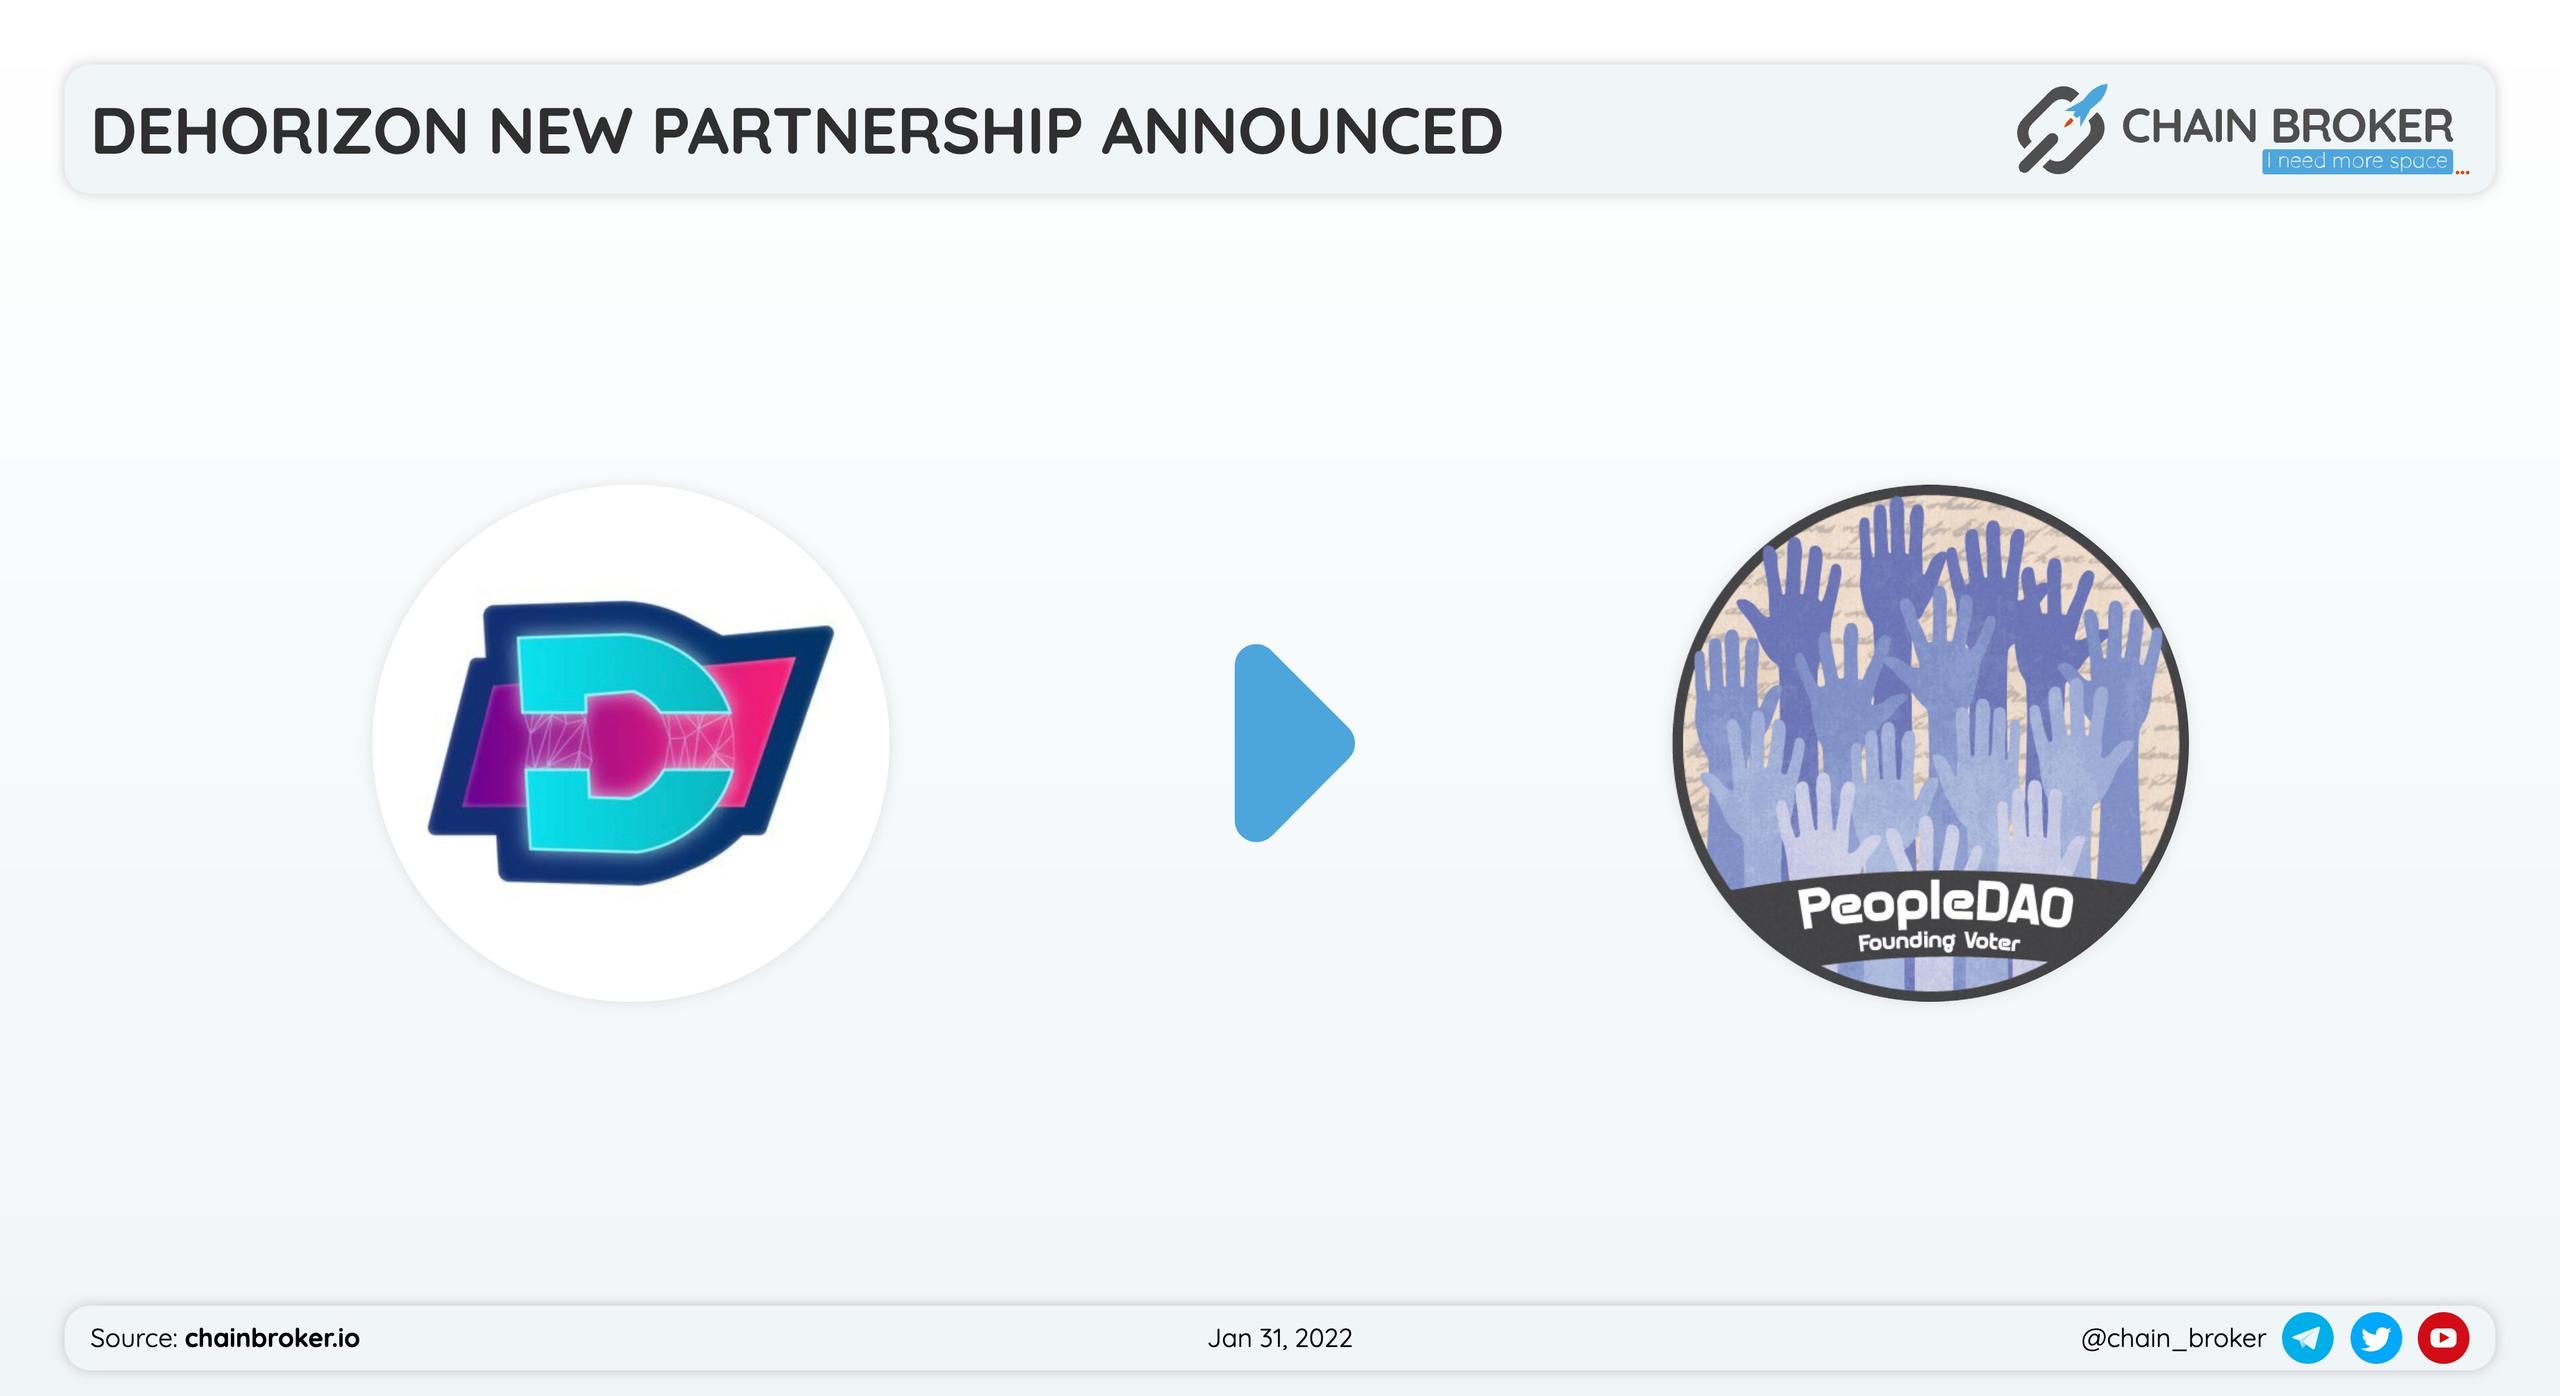 DeHorizon $DEVT has partnered with PeopleDAO to enter the era of web3.0 #metaverse together.